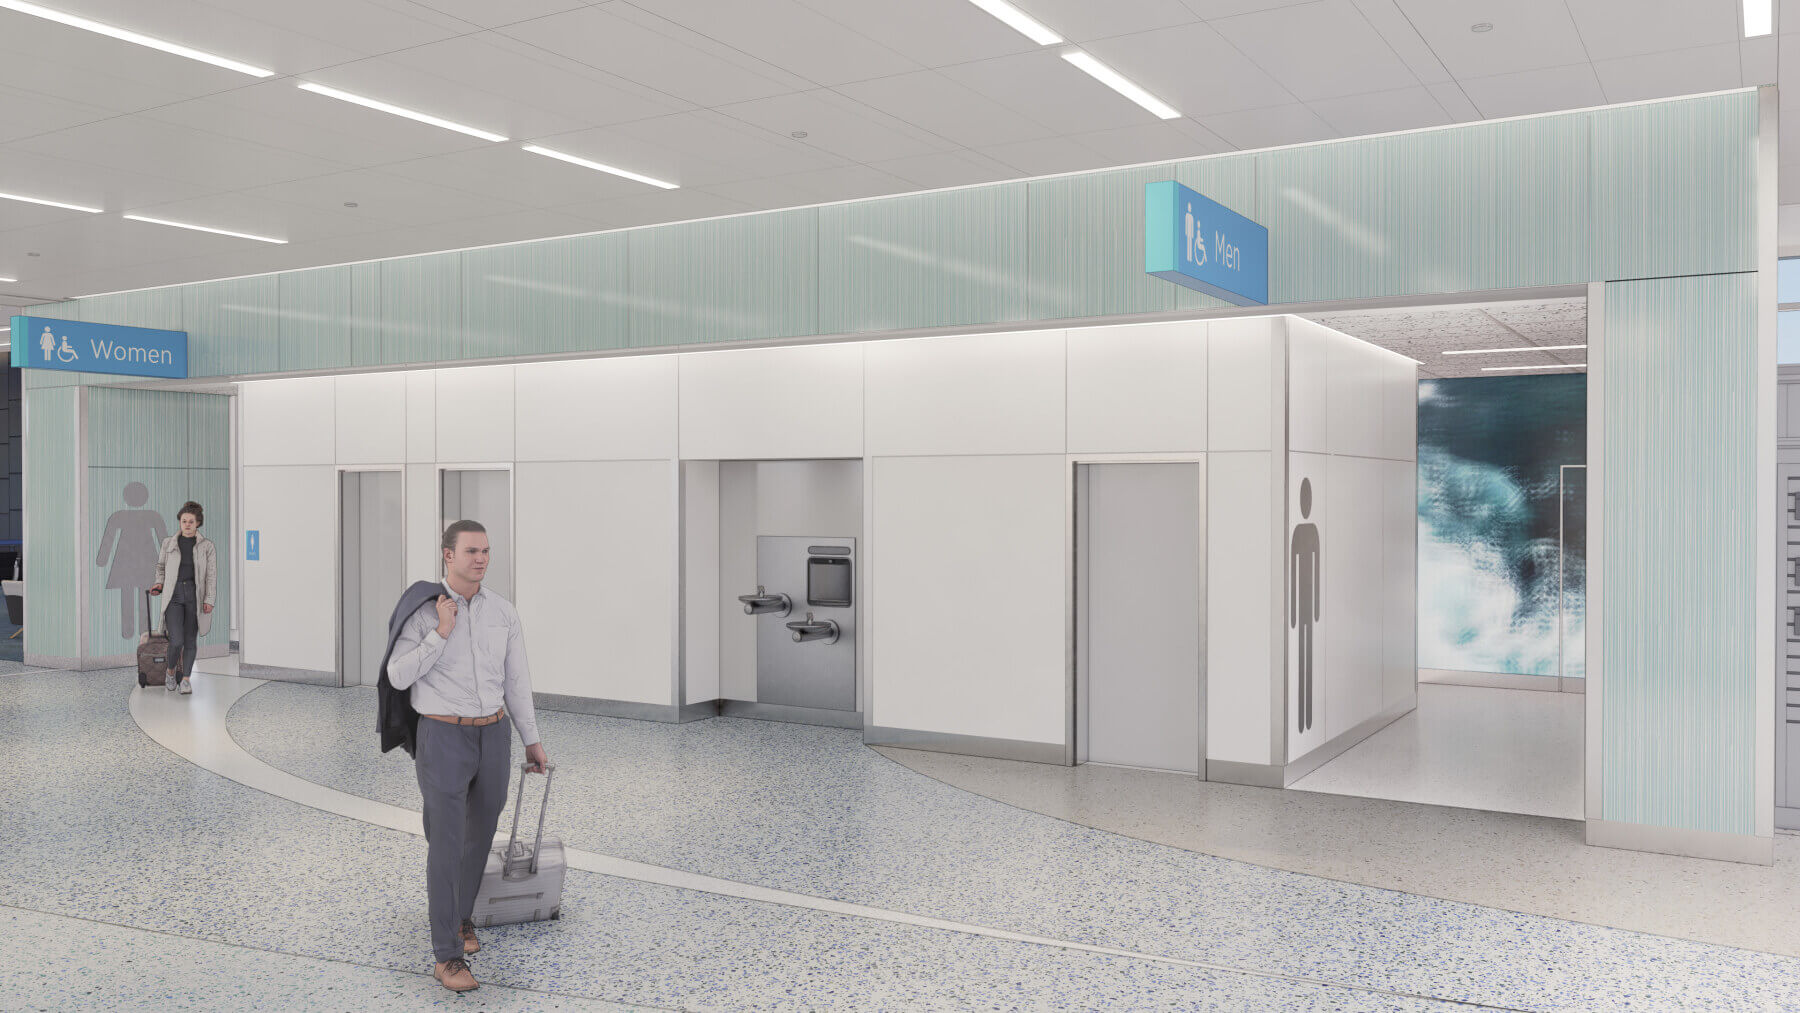 rendering of a person walking by the restrooms in Concourse A at Myrtle Beach International Airport